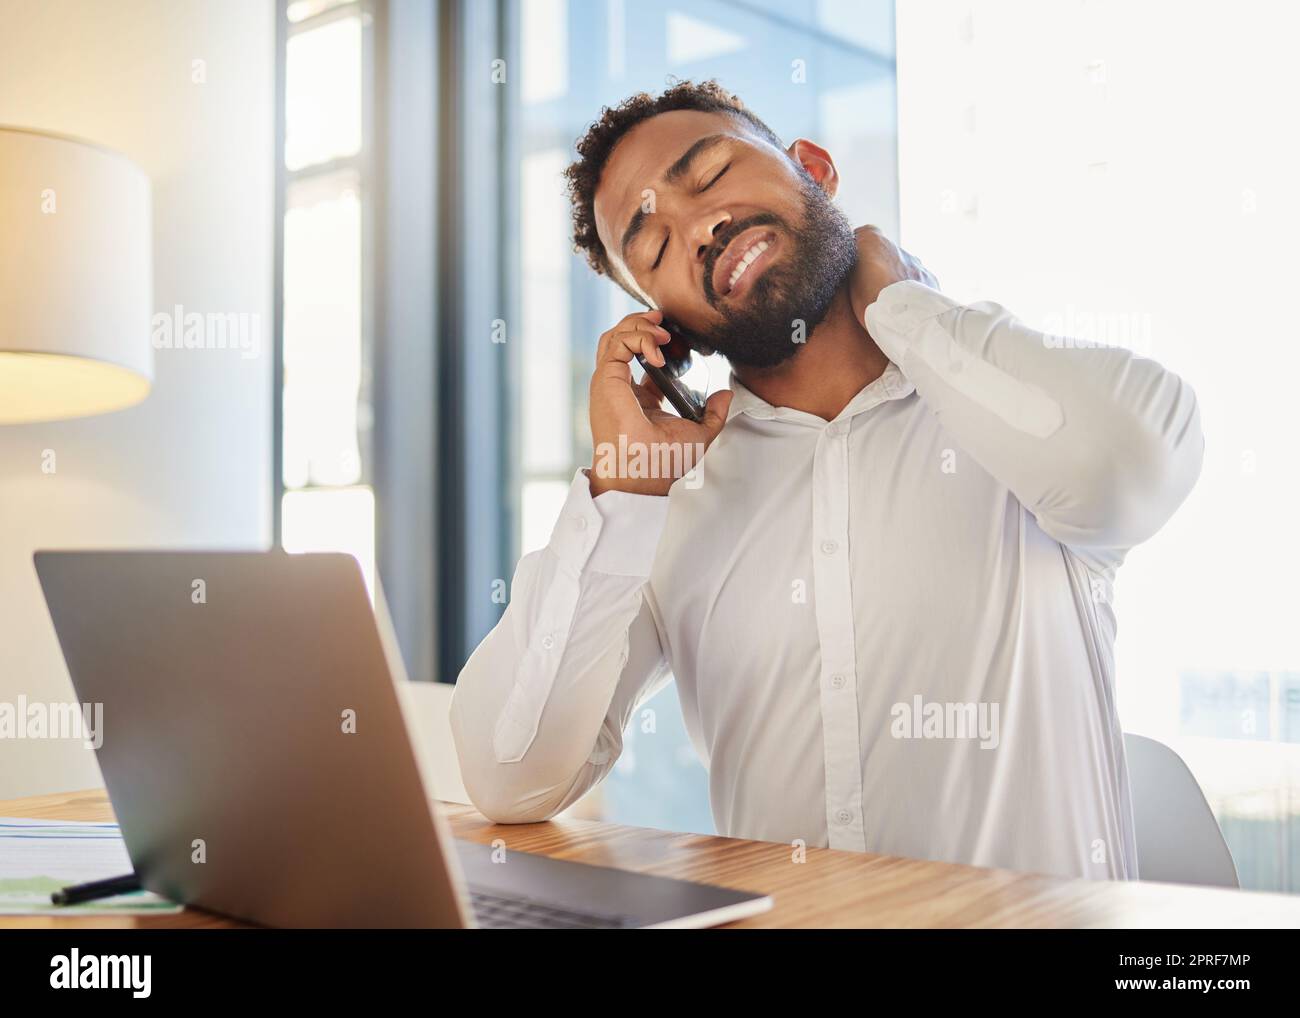 Neck pain, muscle and work stress of a corporate man on a business call at a computer. Tired businessman worker with burnout anxiety working online on a internet finance risk report with a headache Stock Photo